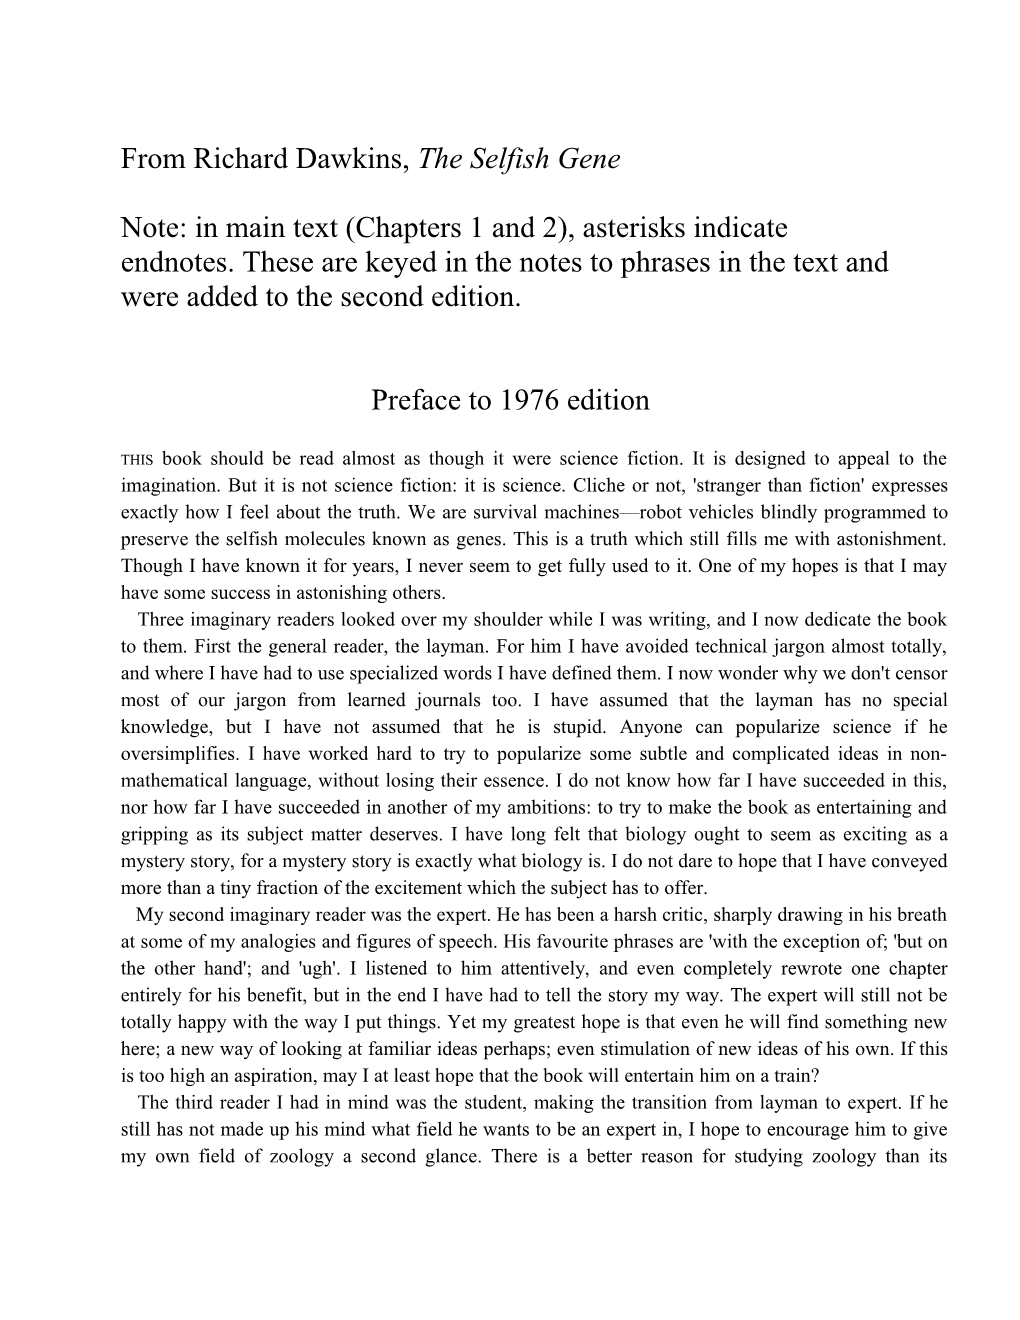 Preface to 1976 Edition